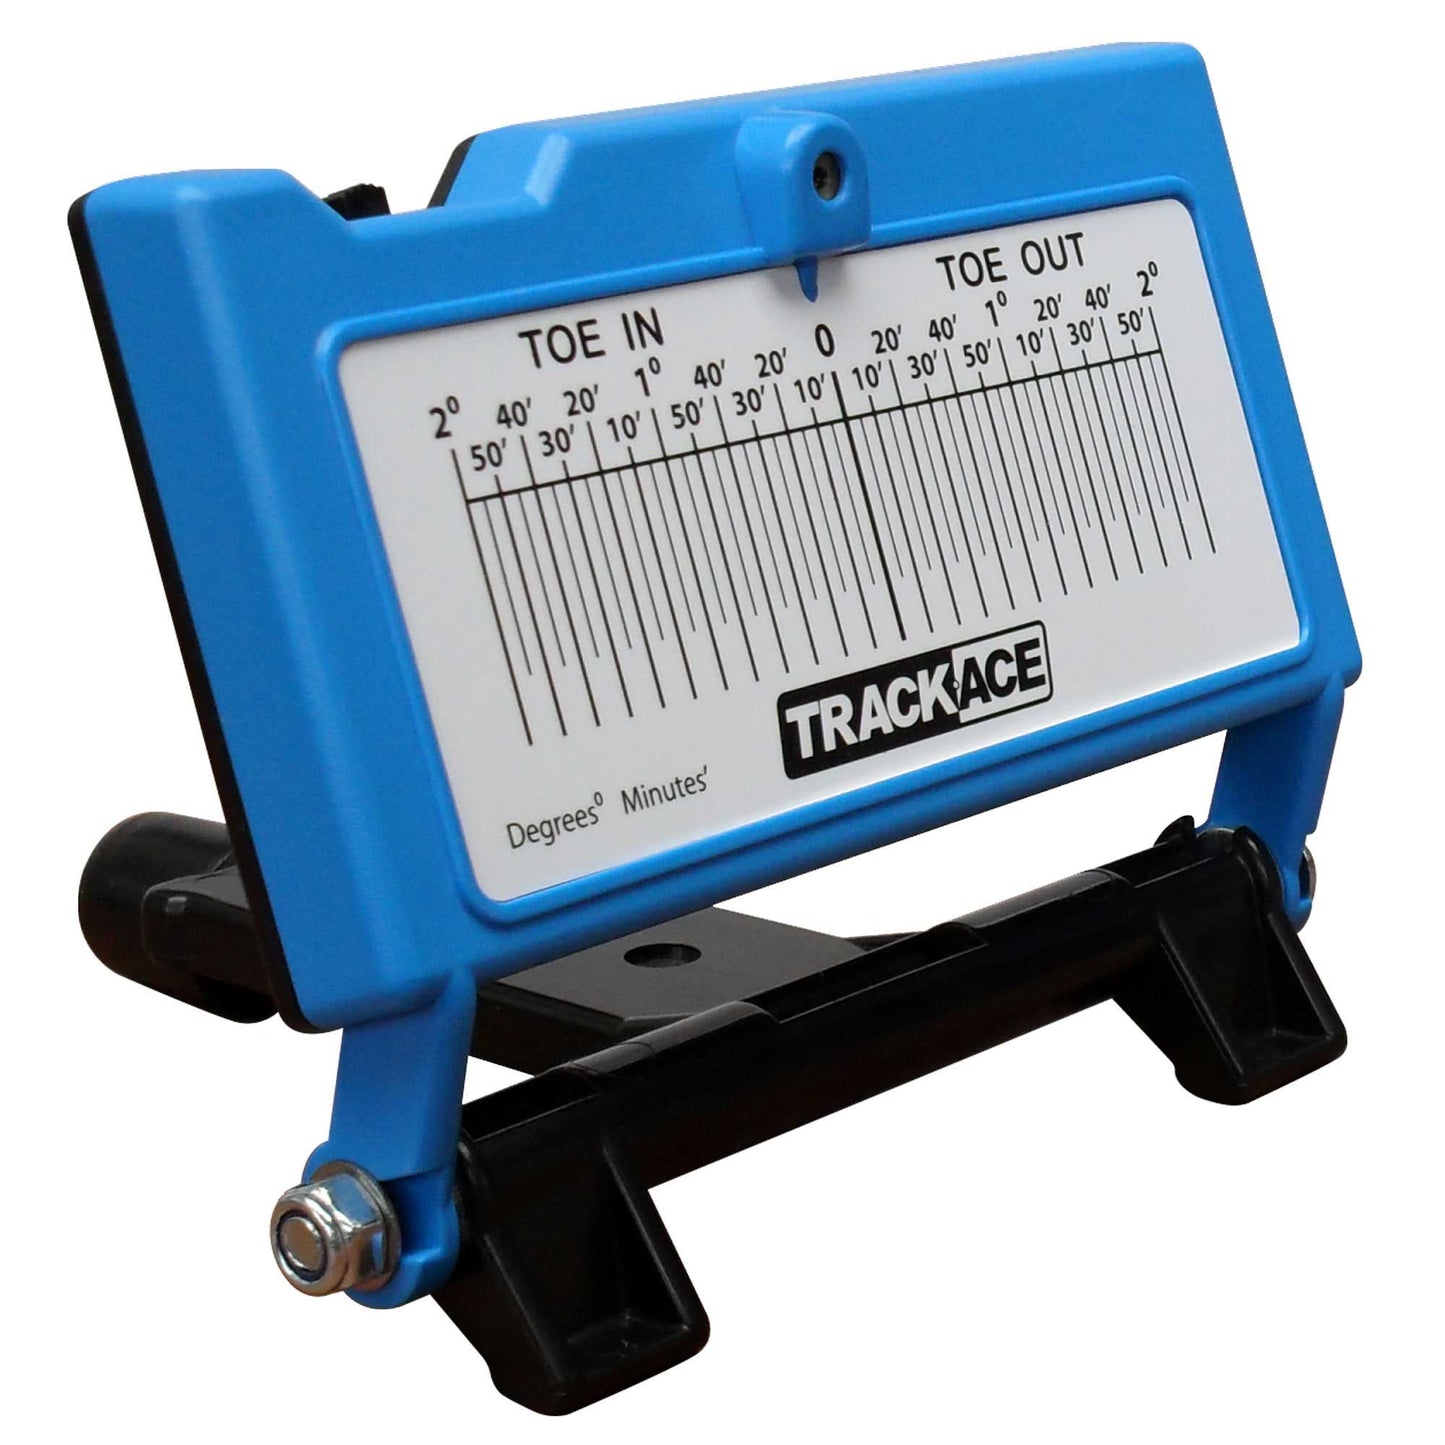 track-ace-alignment wheel gage